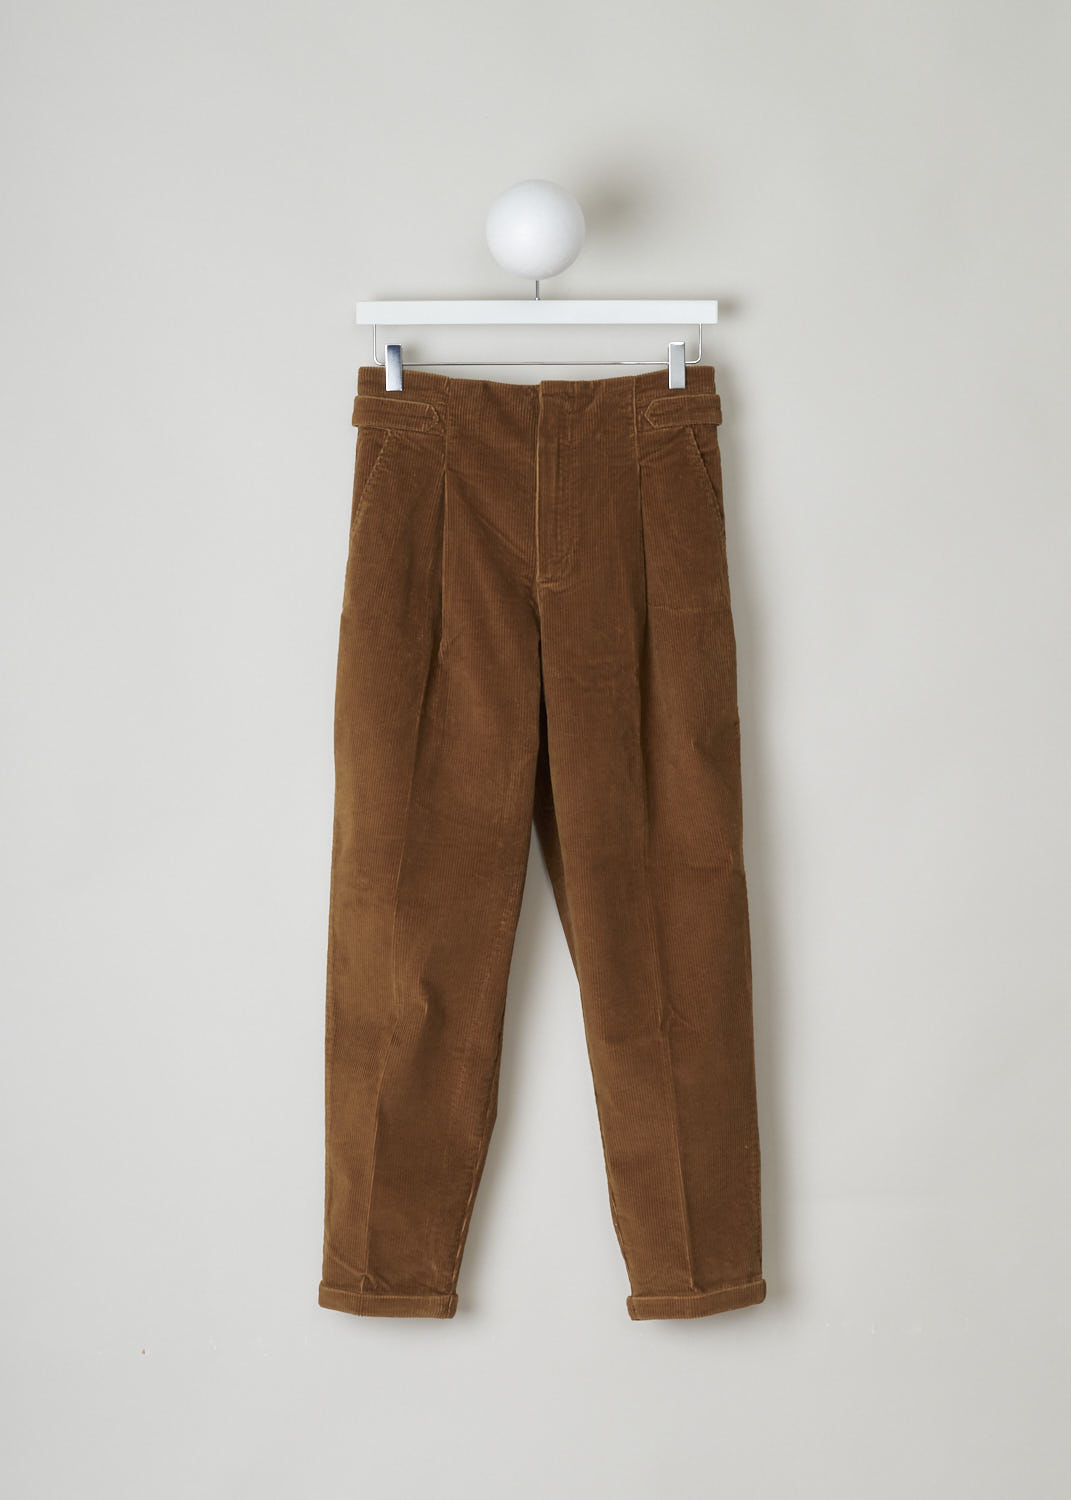 CLOSED, BROWN CORDUROY TROUSERS, C91044_38W_20_928, Brown, Front, These brown corduroy trousers feature a concealed zip and button closure. In the front, these trousers have slanted pockets. The tapered pants legs with a folded hem. 
